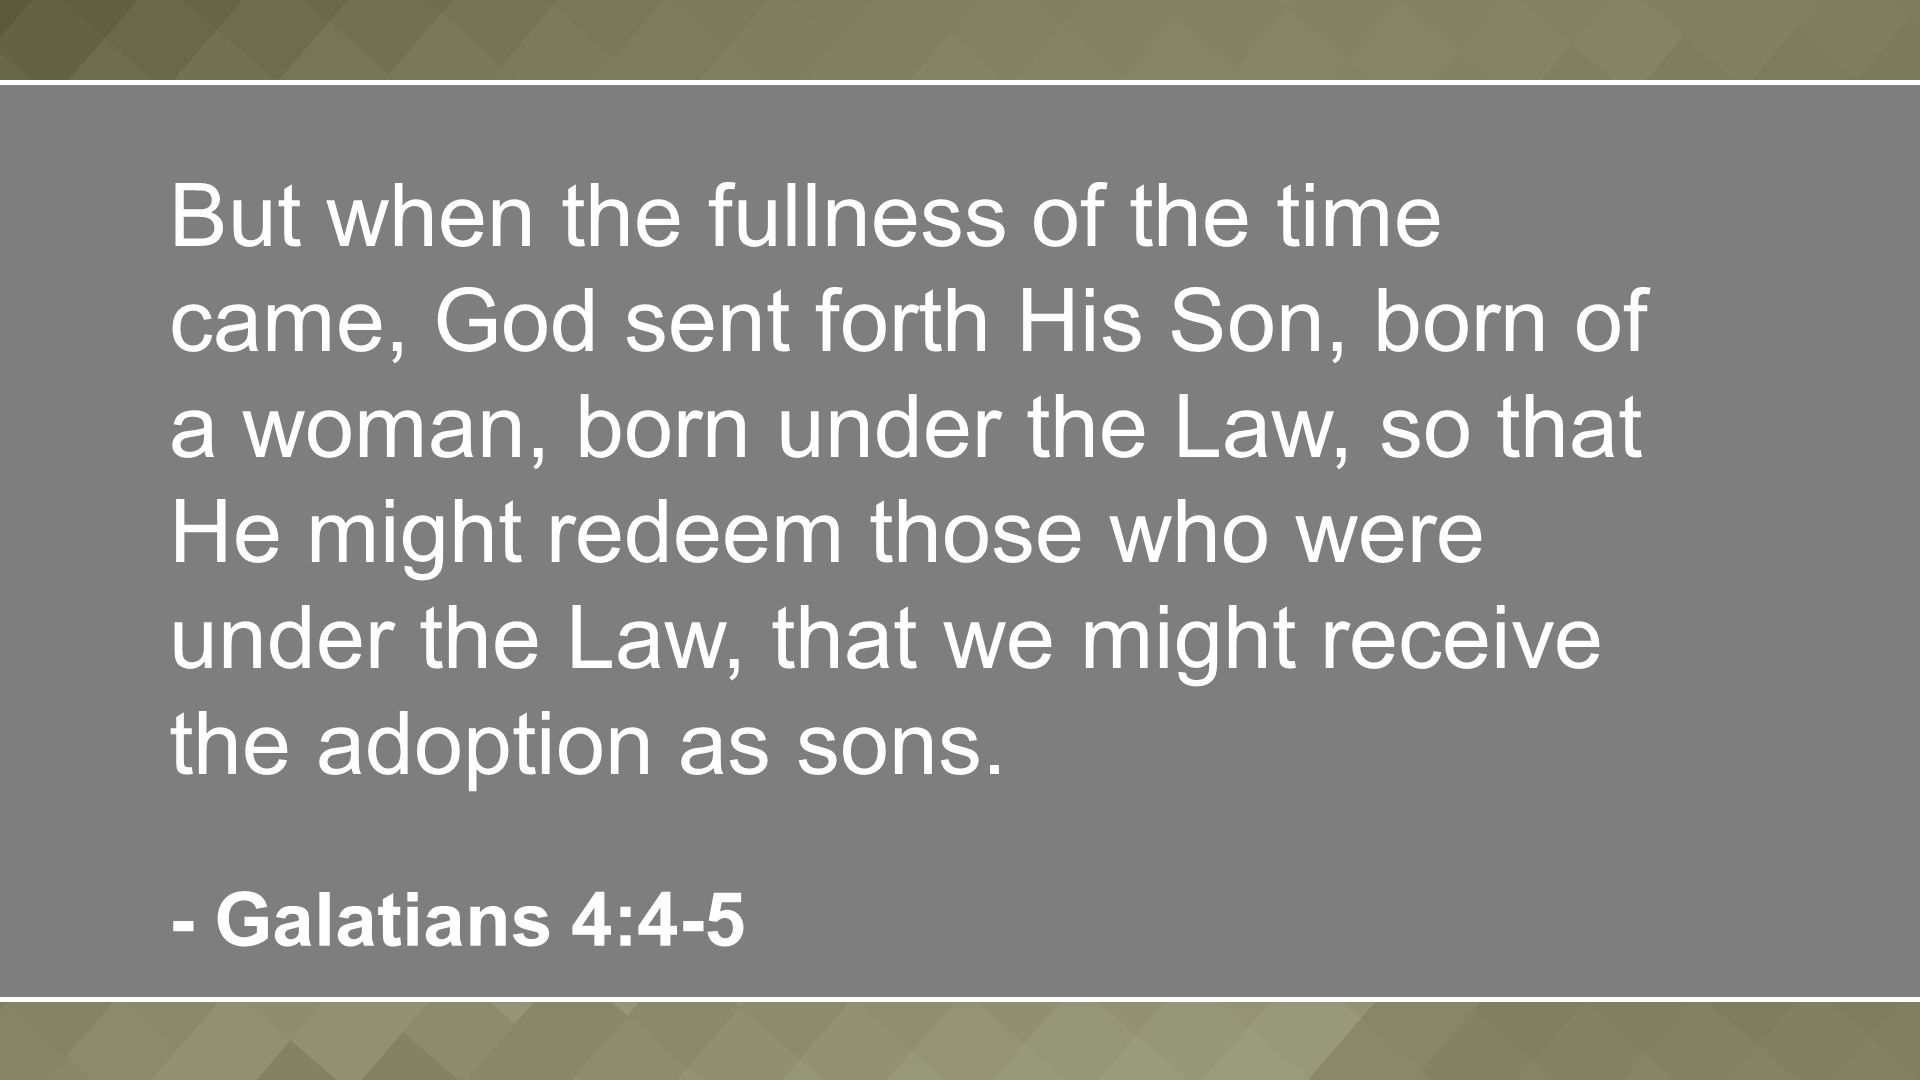 But when the fullness of the time came, God sent forth His Son, born of a woman, born under the Law, so that He might redeem those who were under the Law, that we might receive the adoption as sons.